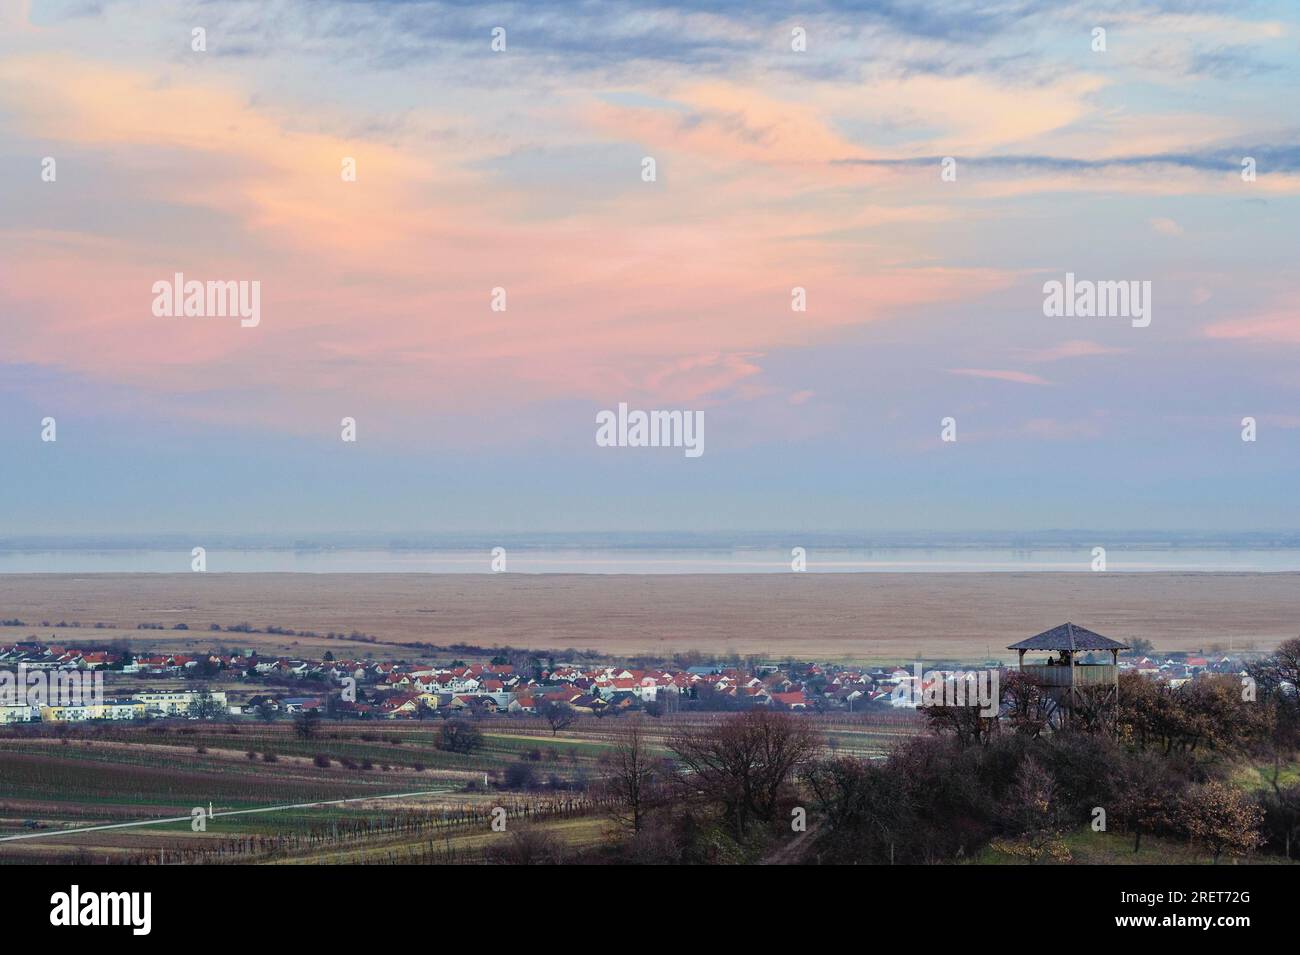 Municipality of Oggau am neusiedlersee in the evening Stock Photo